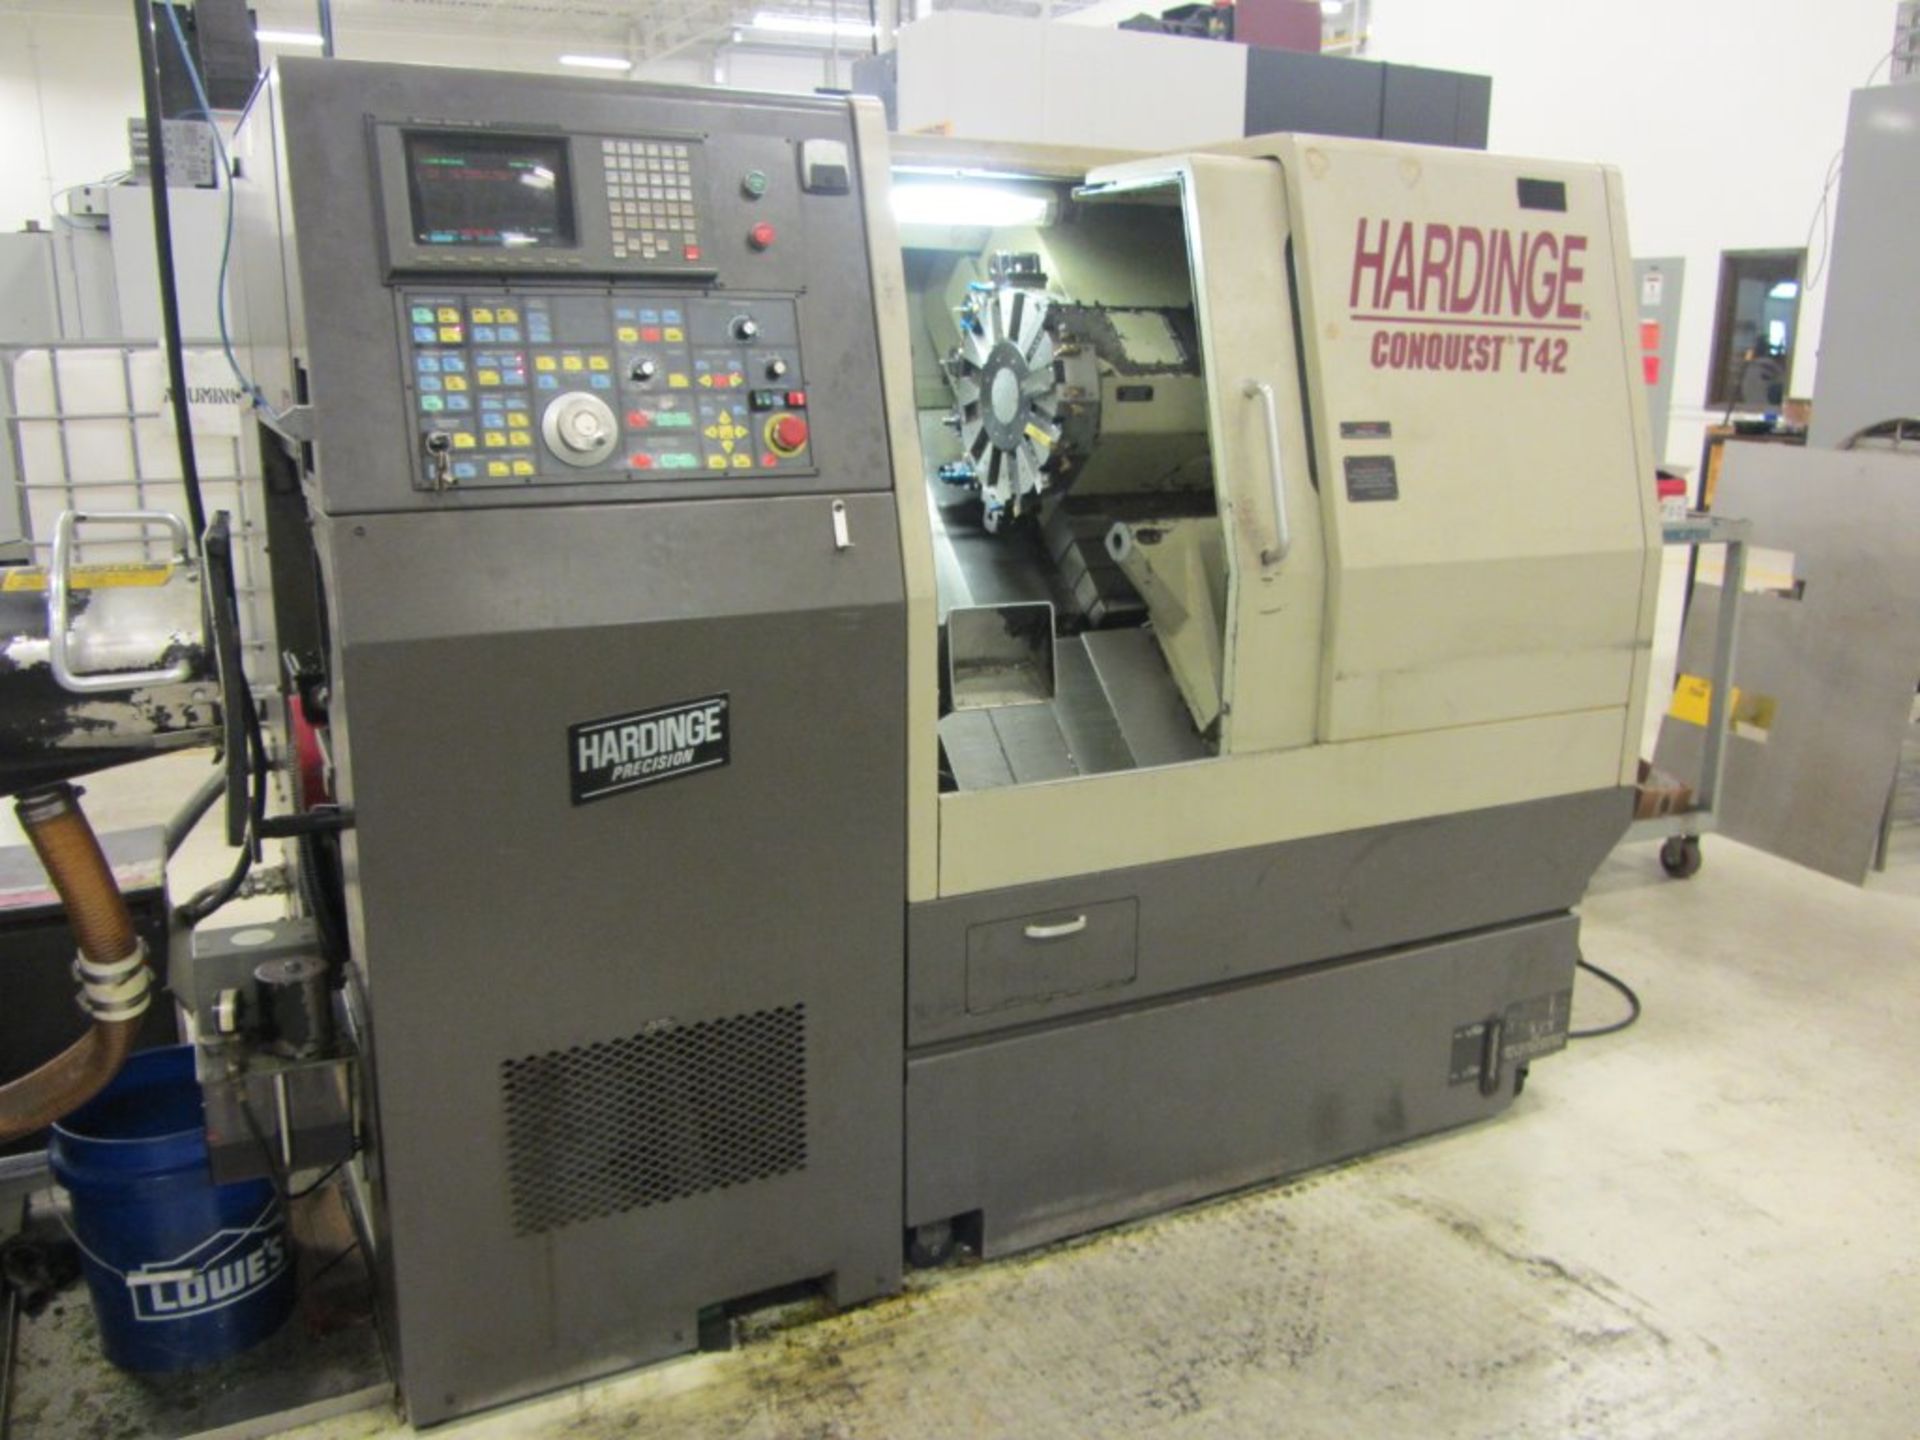 Hardinge Conquest T42 CNC Turning Center with 6'' Chuck, Collet Spindle Nose, Spindle Speeds to 5000